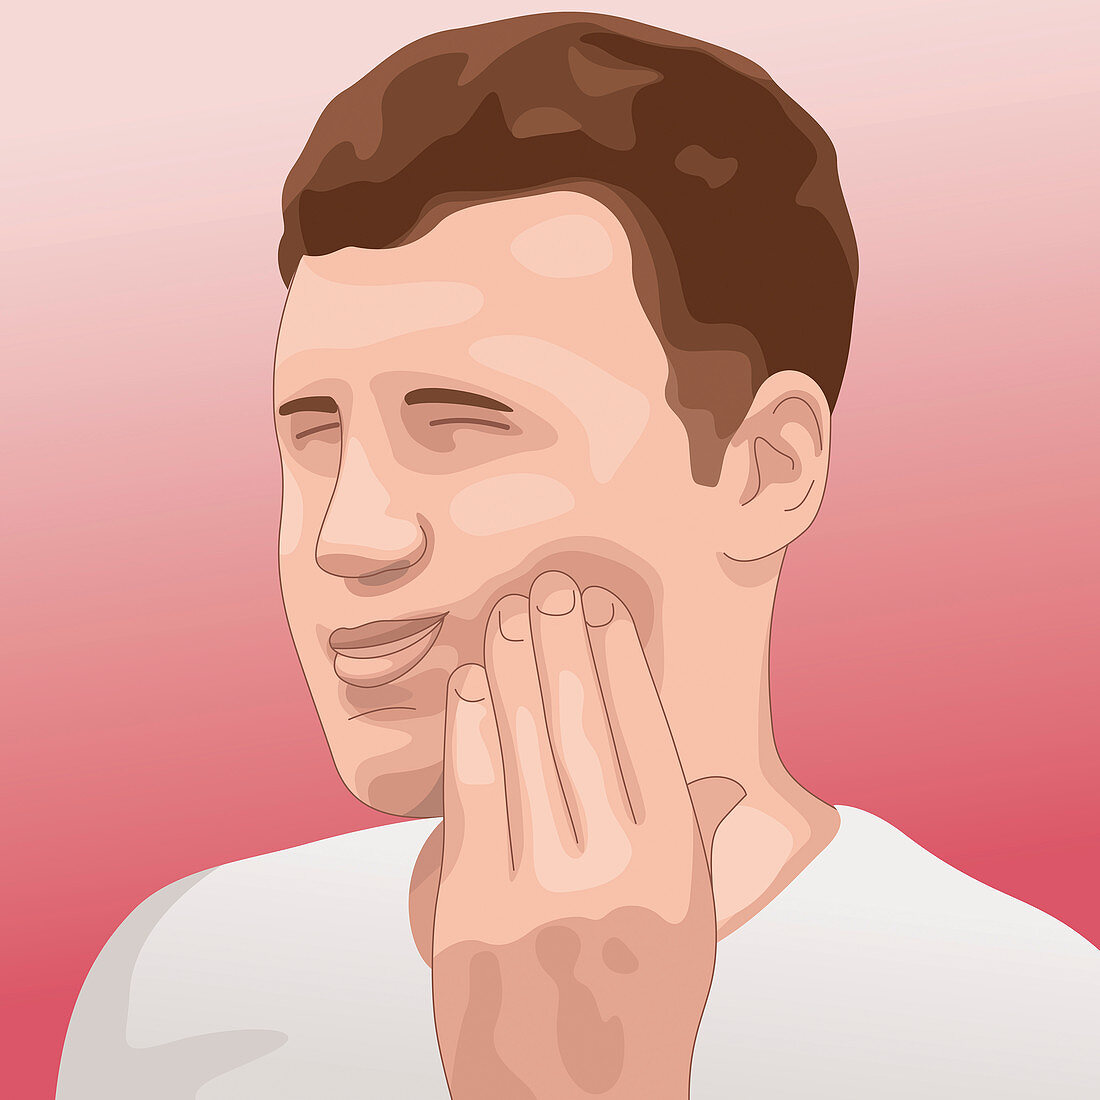 Man grimacing in pain with toothache, illustration